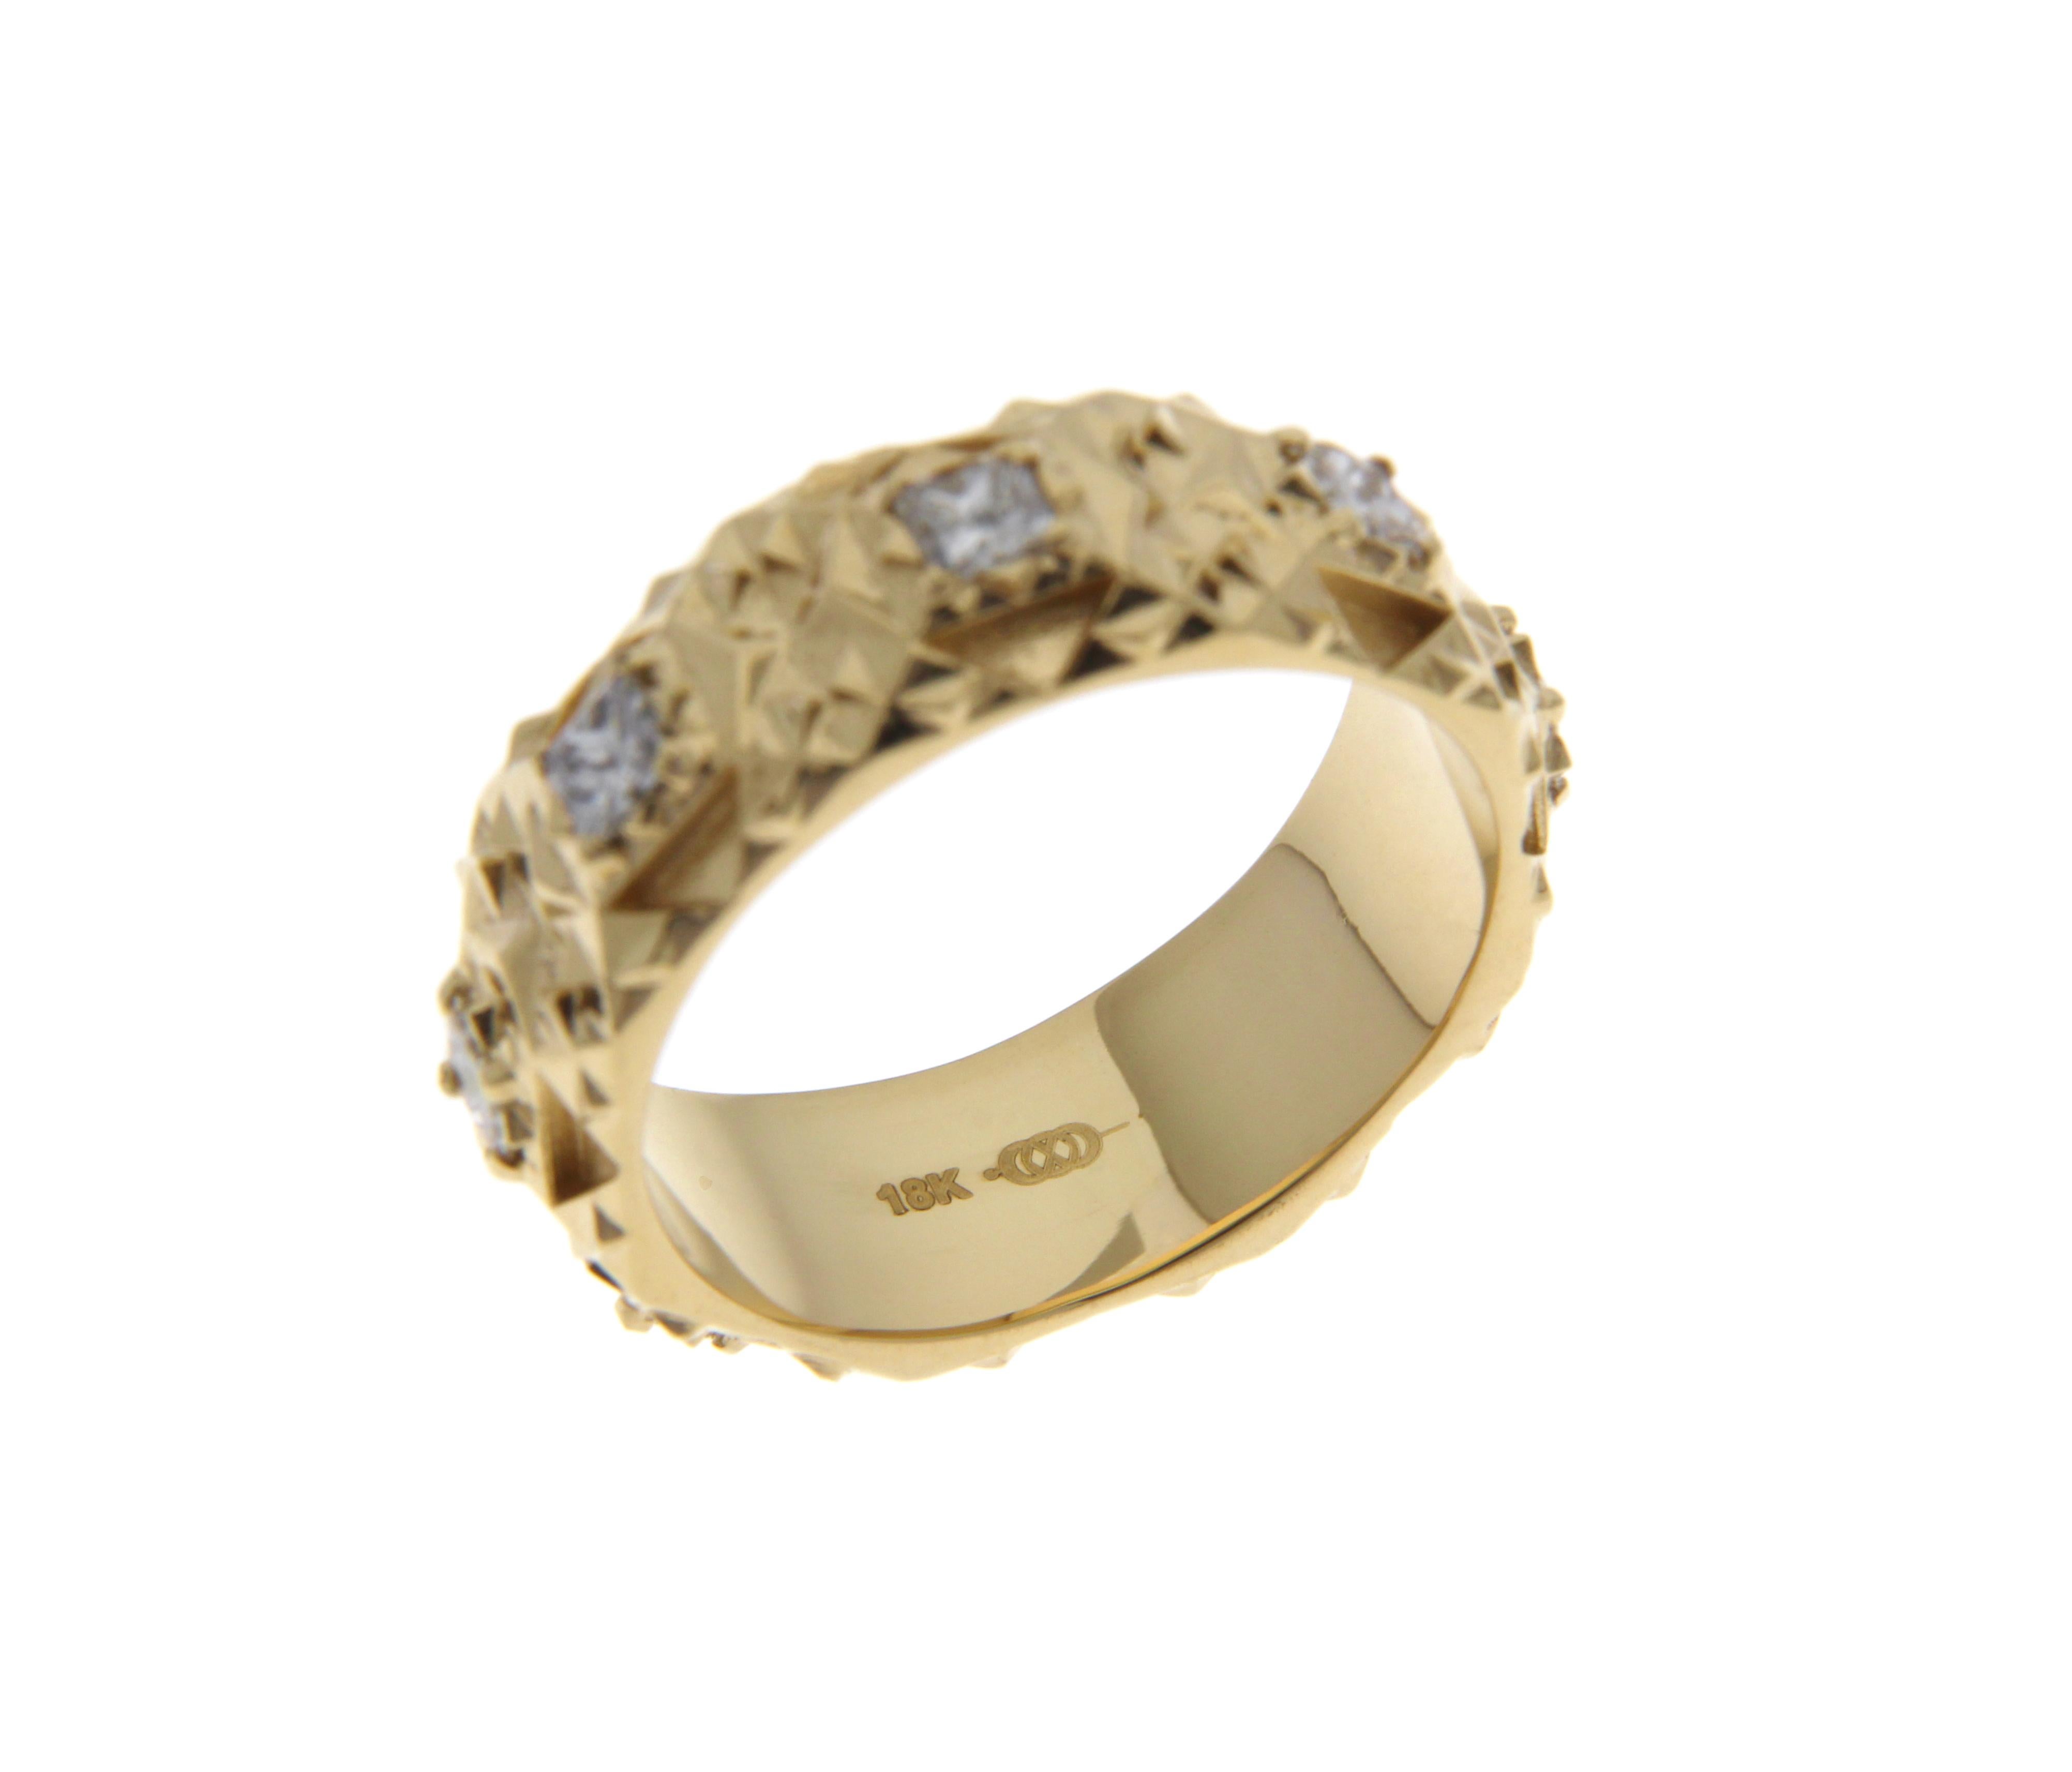 This ONE OF A KIND Piece is inspired by ancient temples and fractals to empower the wearer. This 18k unique piece can be worn as an everyday ring or used as a wedding band. 

John Brevard applies his background in architecture and multidisciplinary